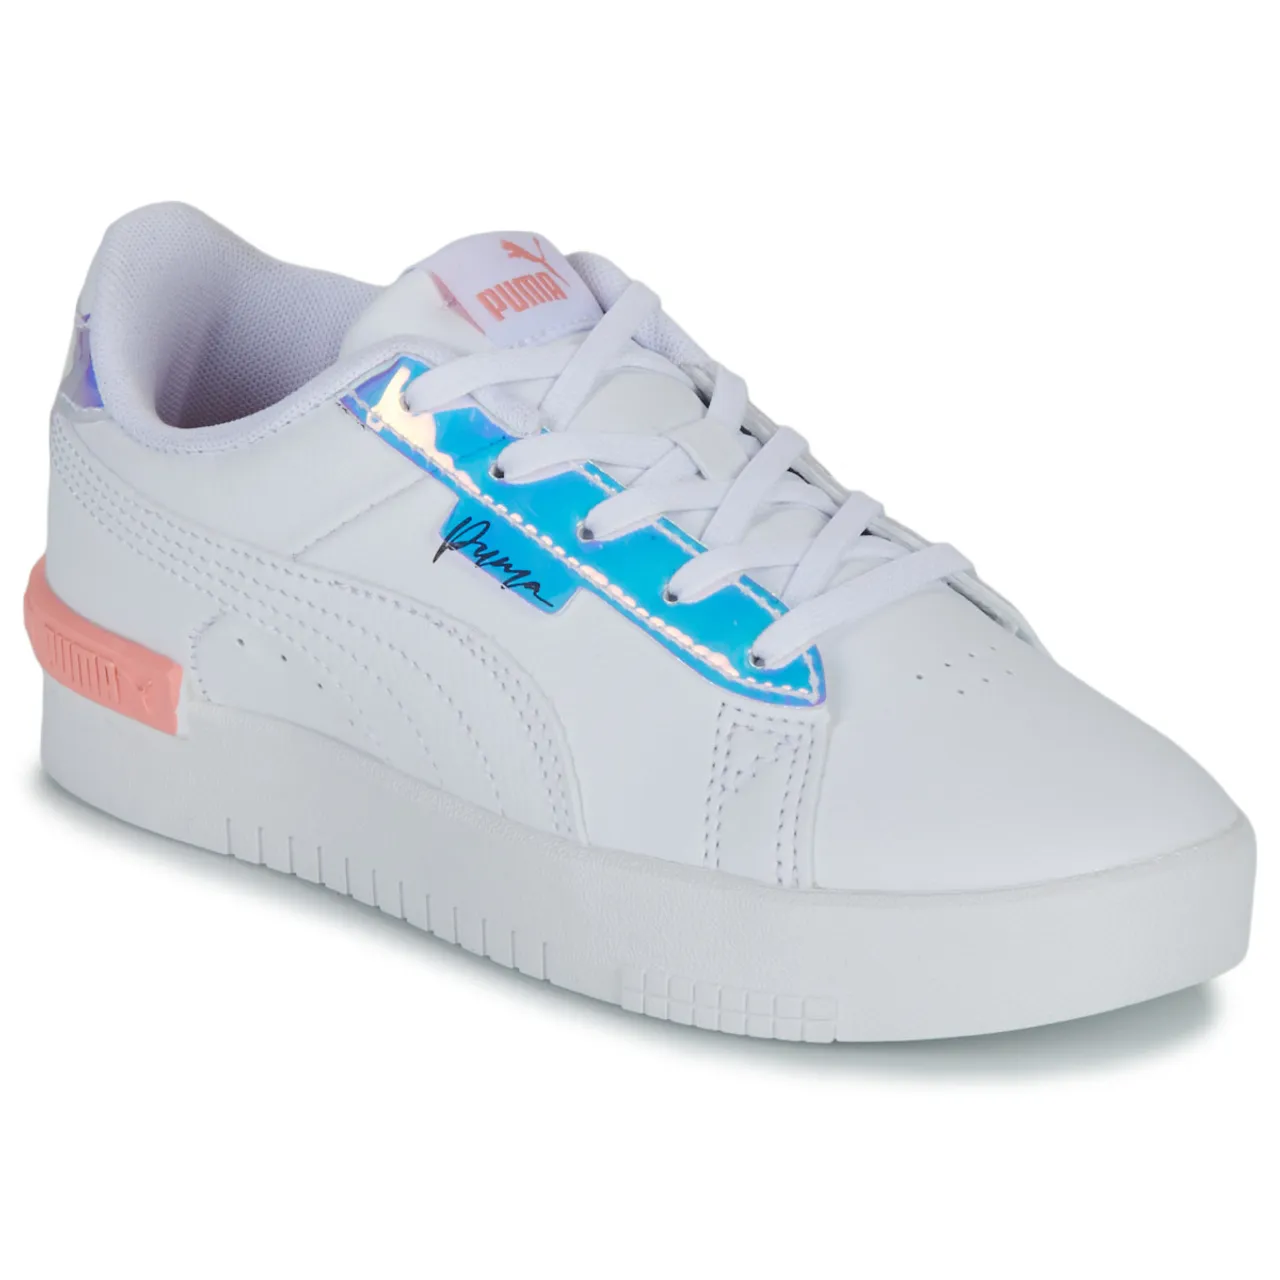 Puma  Jada Crystal Wings PS  girls's Children's Shoes (Trainers) in White